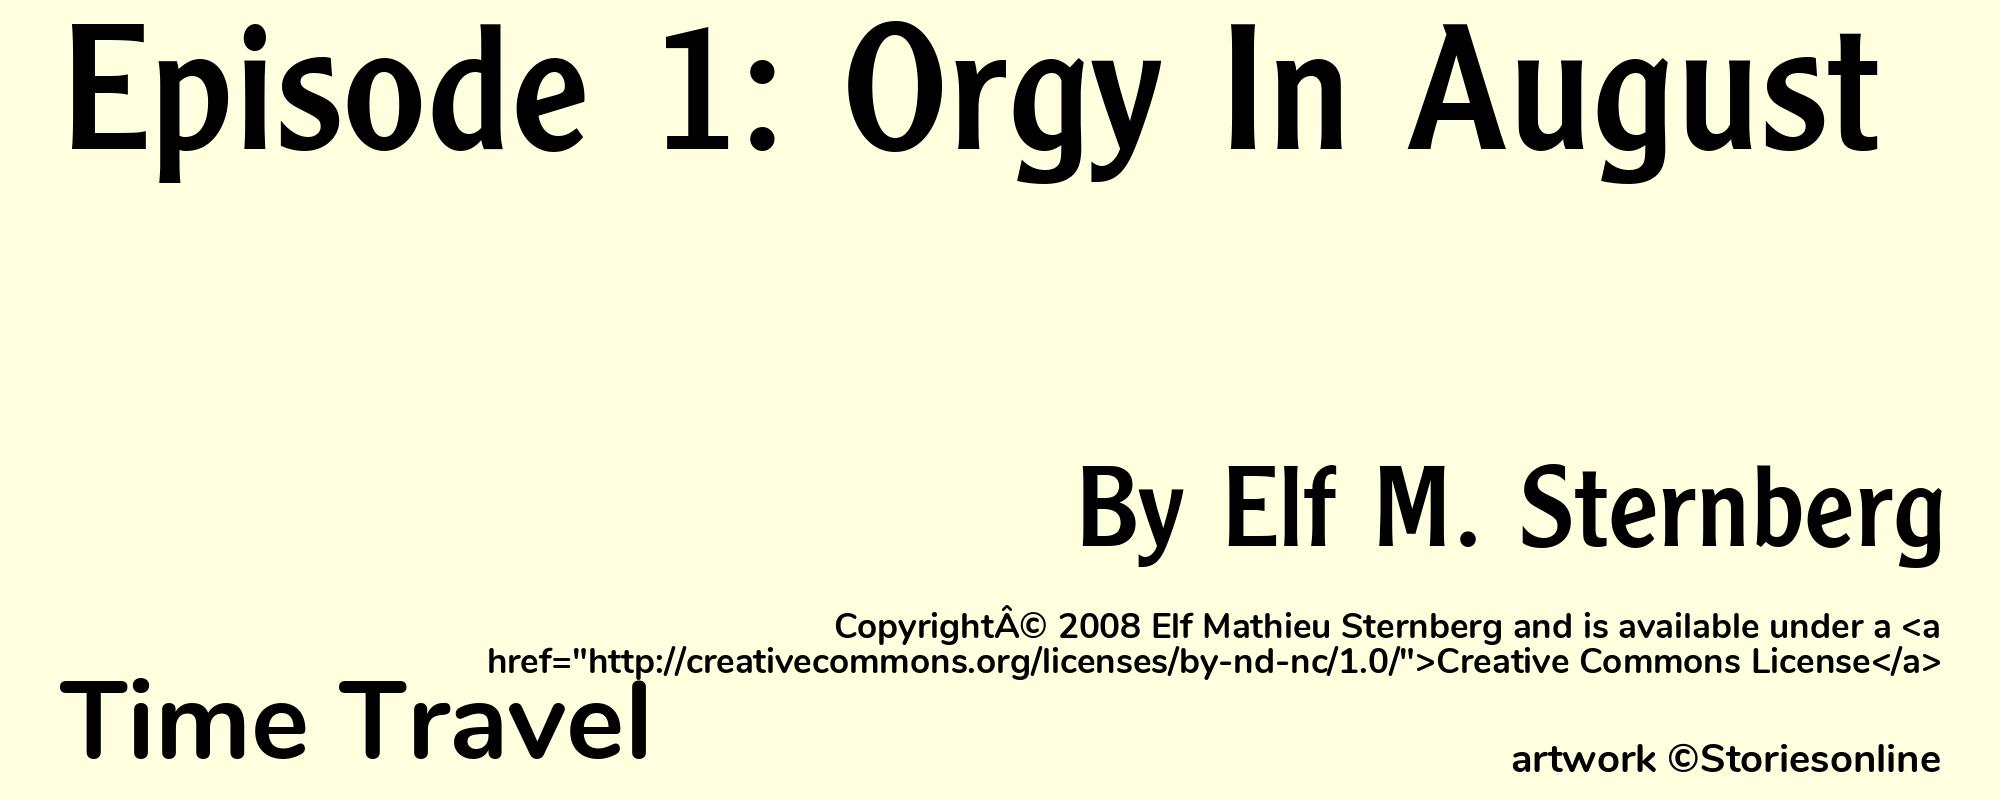 Episode 1: Orgy In August - Cover